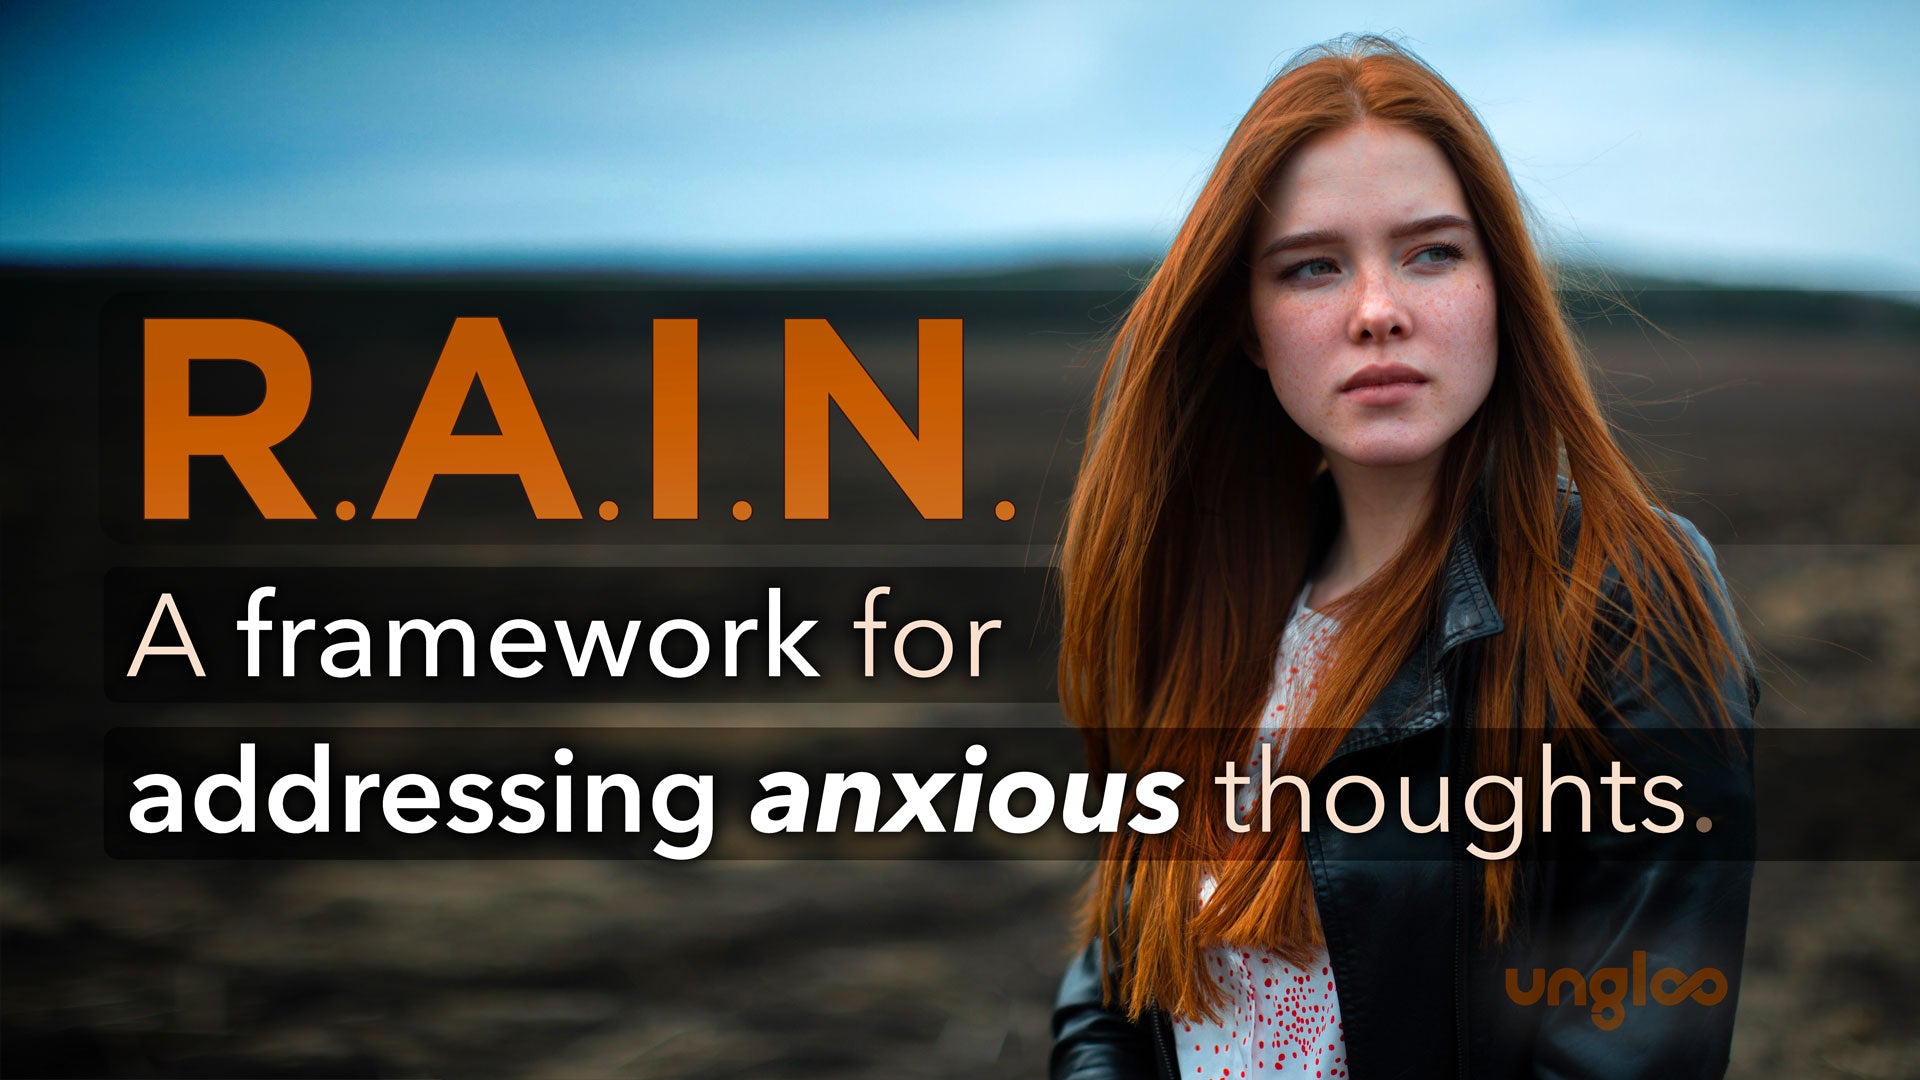 rain framework blog header with young woman and anxious thoughts